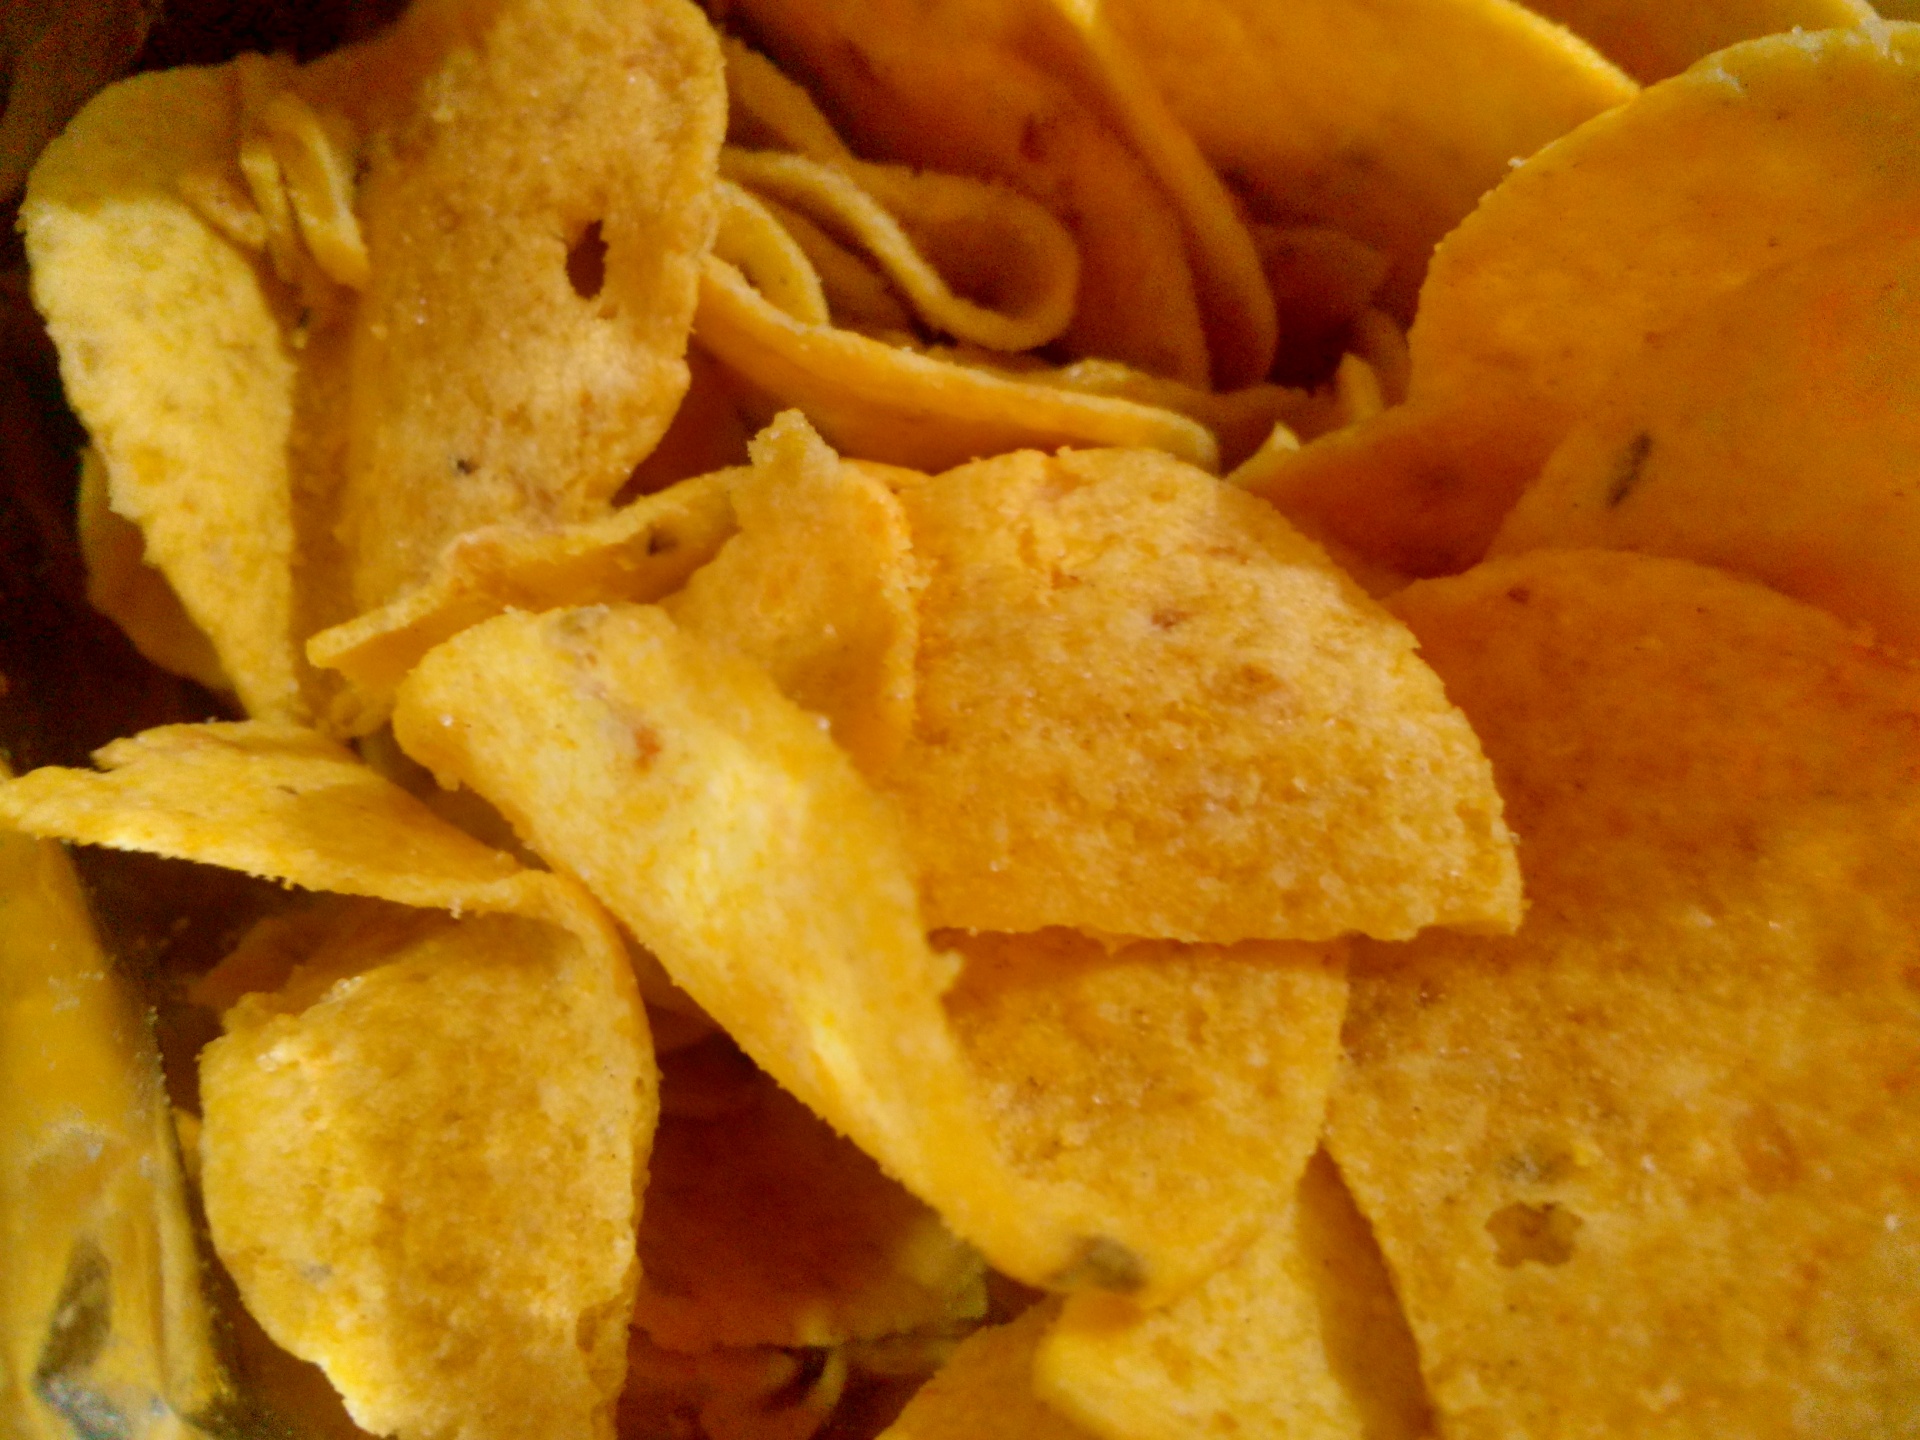 chips junk foods chips background free photo